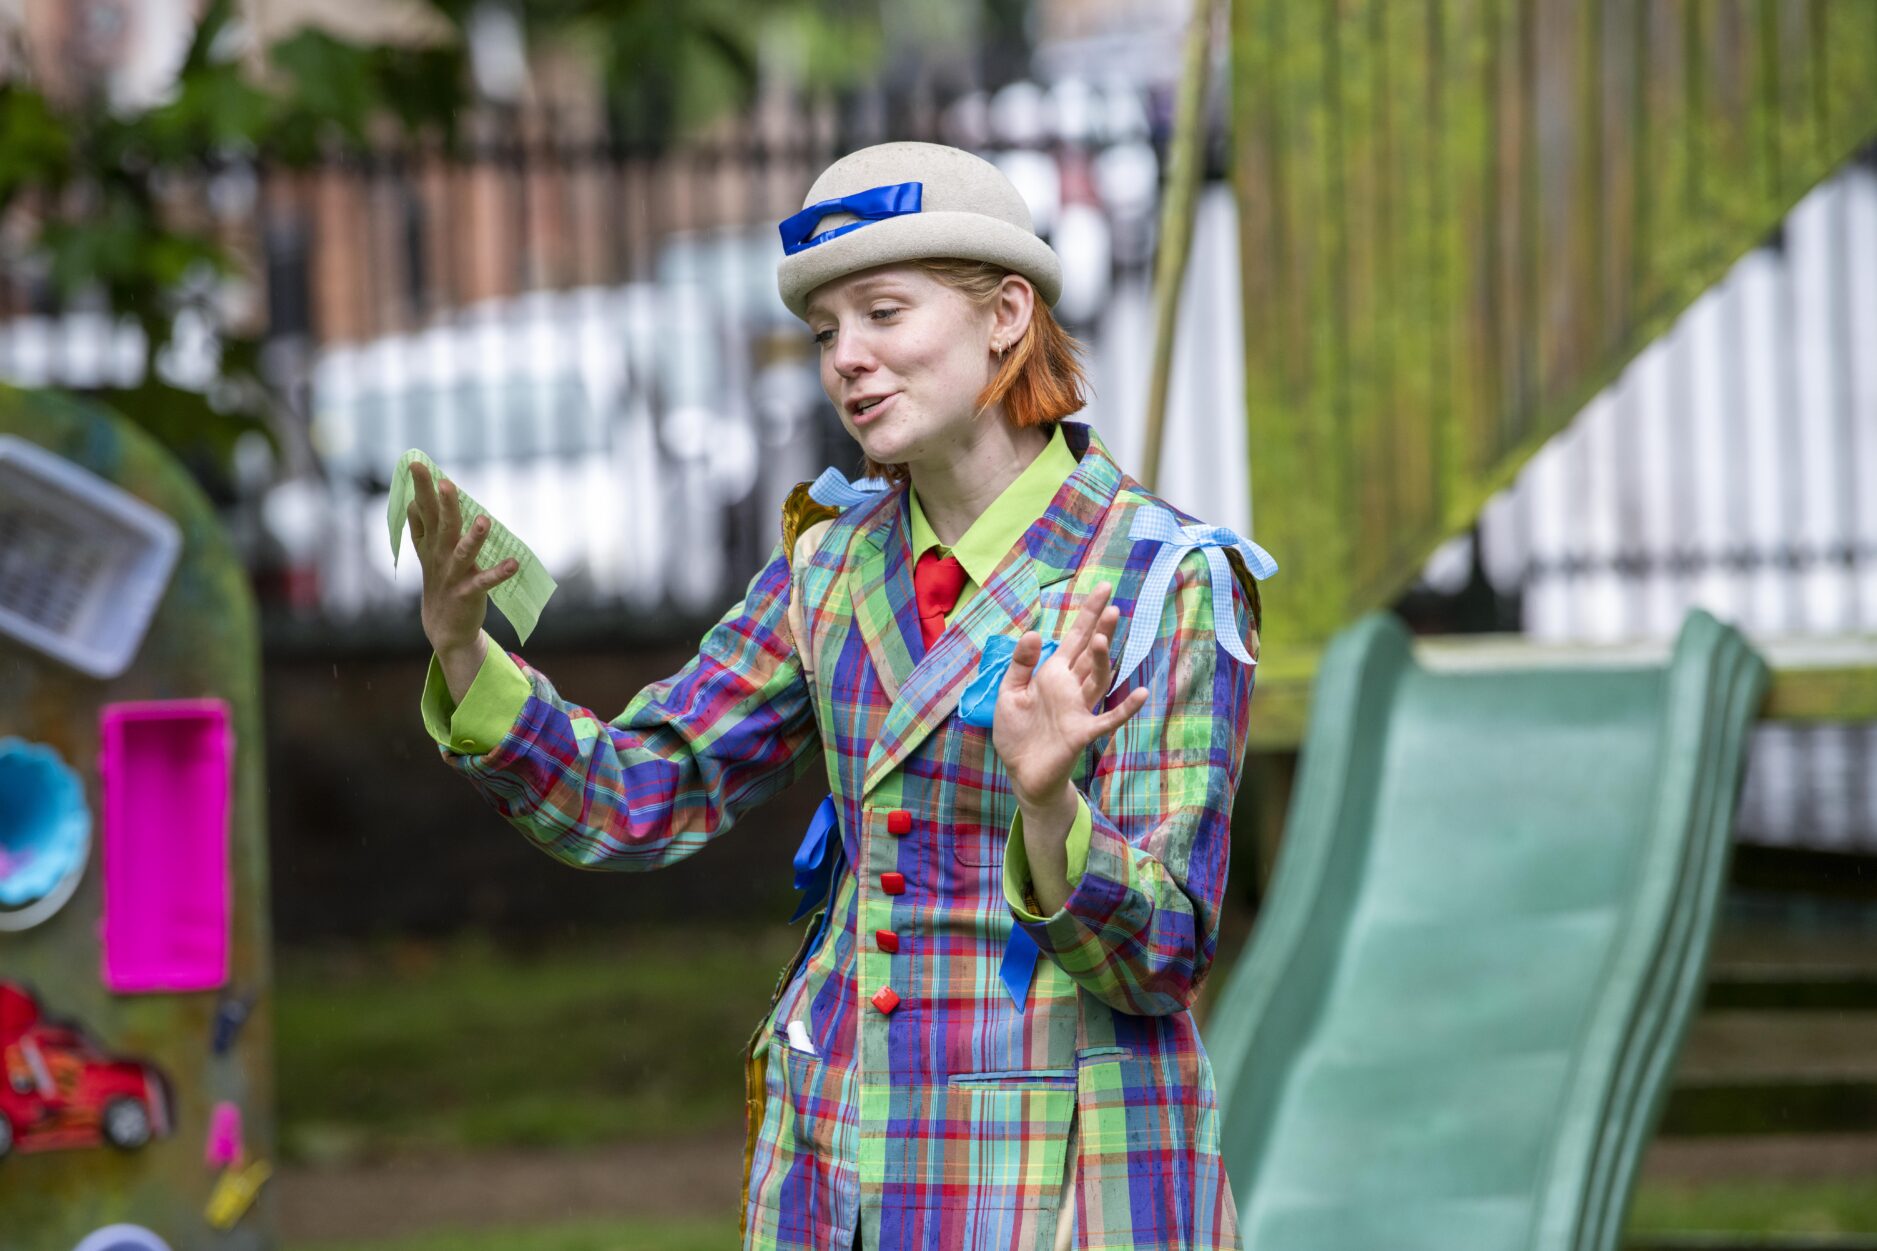 Zoë May Dales as Malvolio in Twelfth Night. (Photo by Tracey Whitefoot).